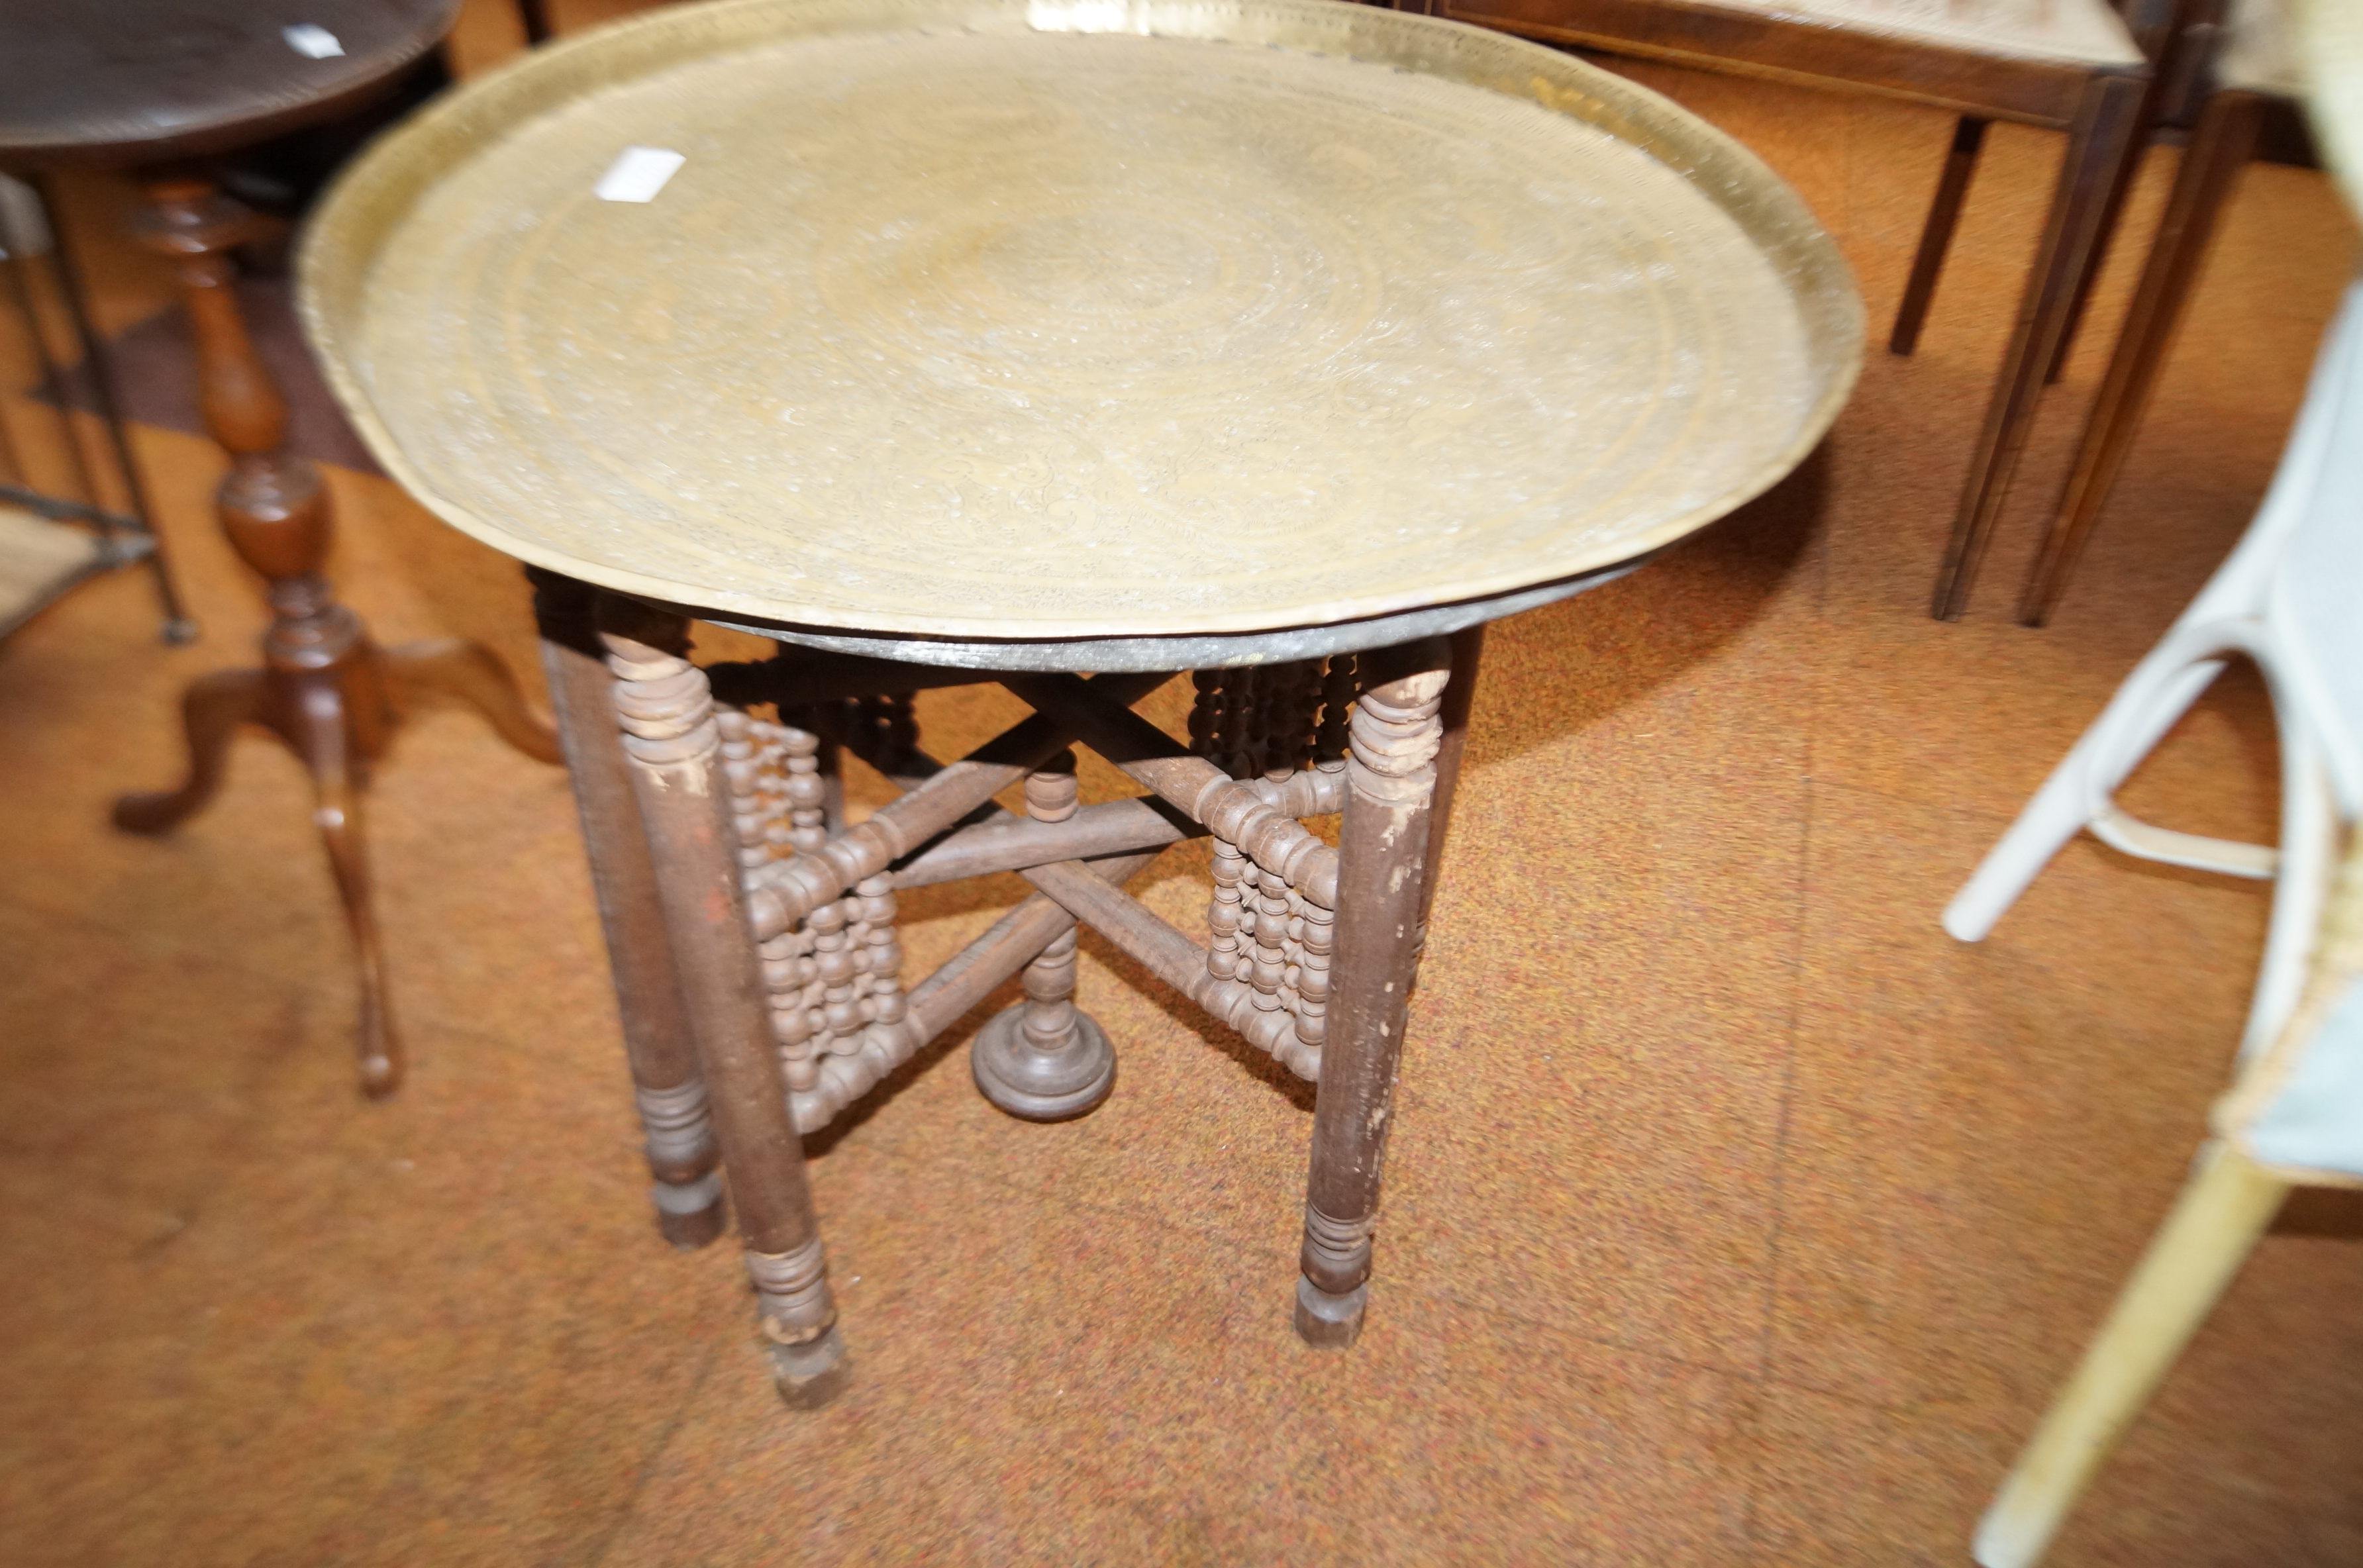 Indian brass topped table